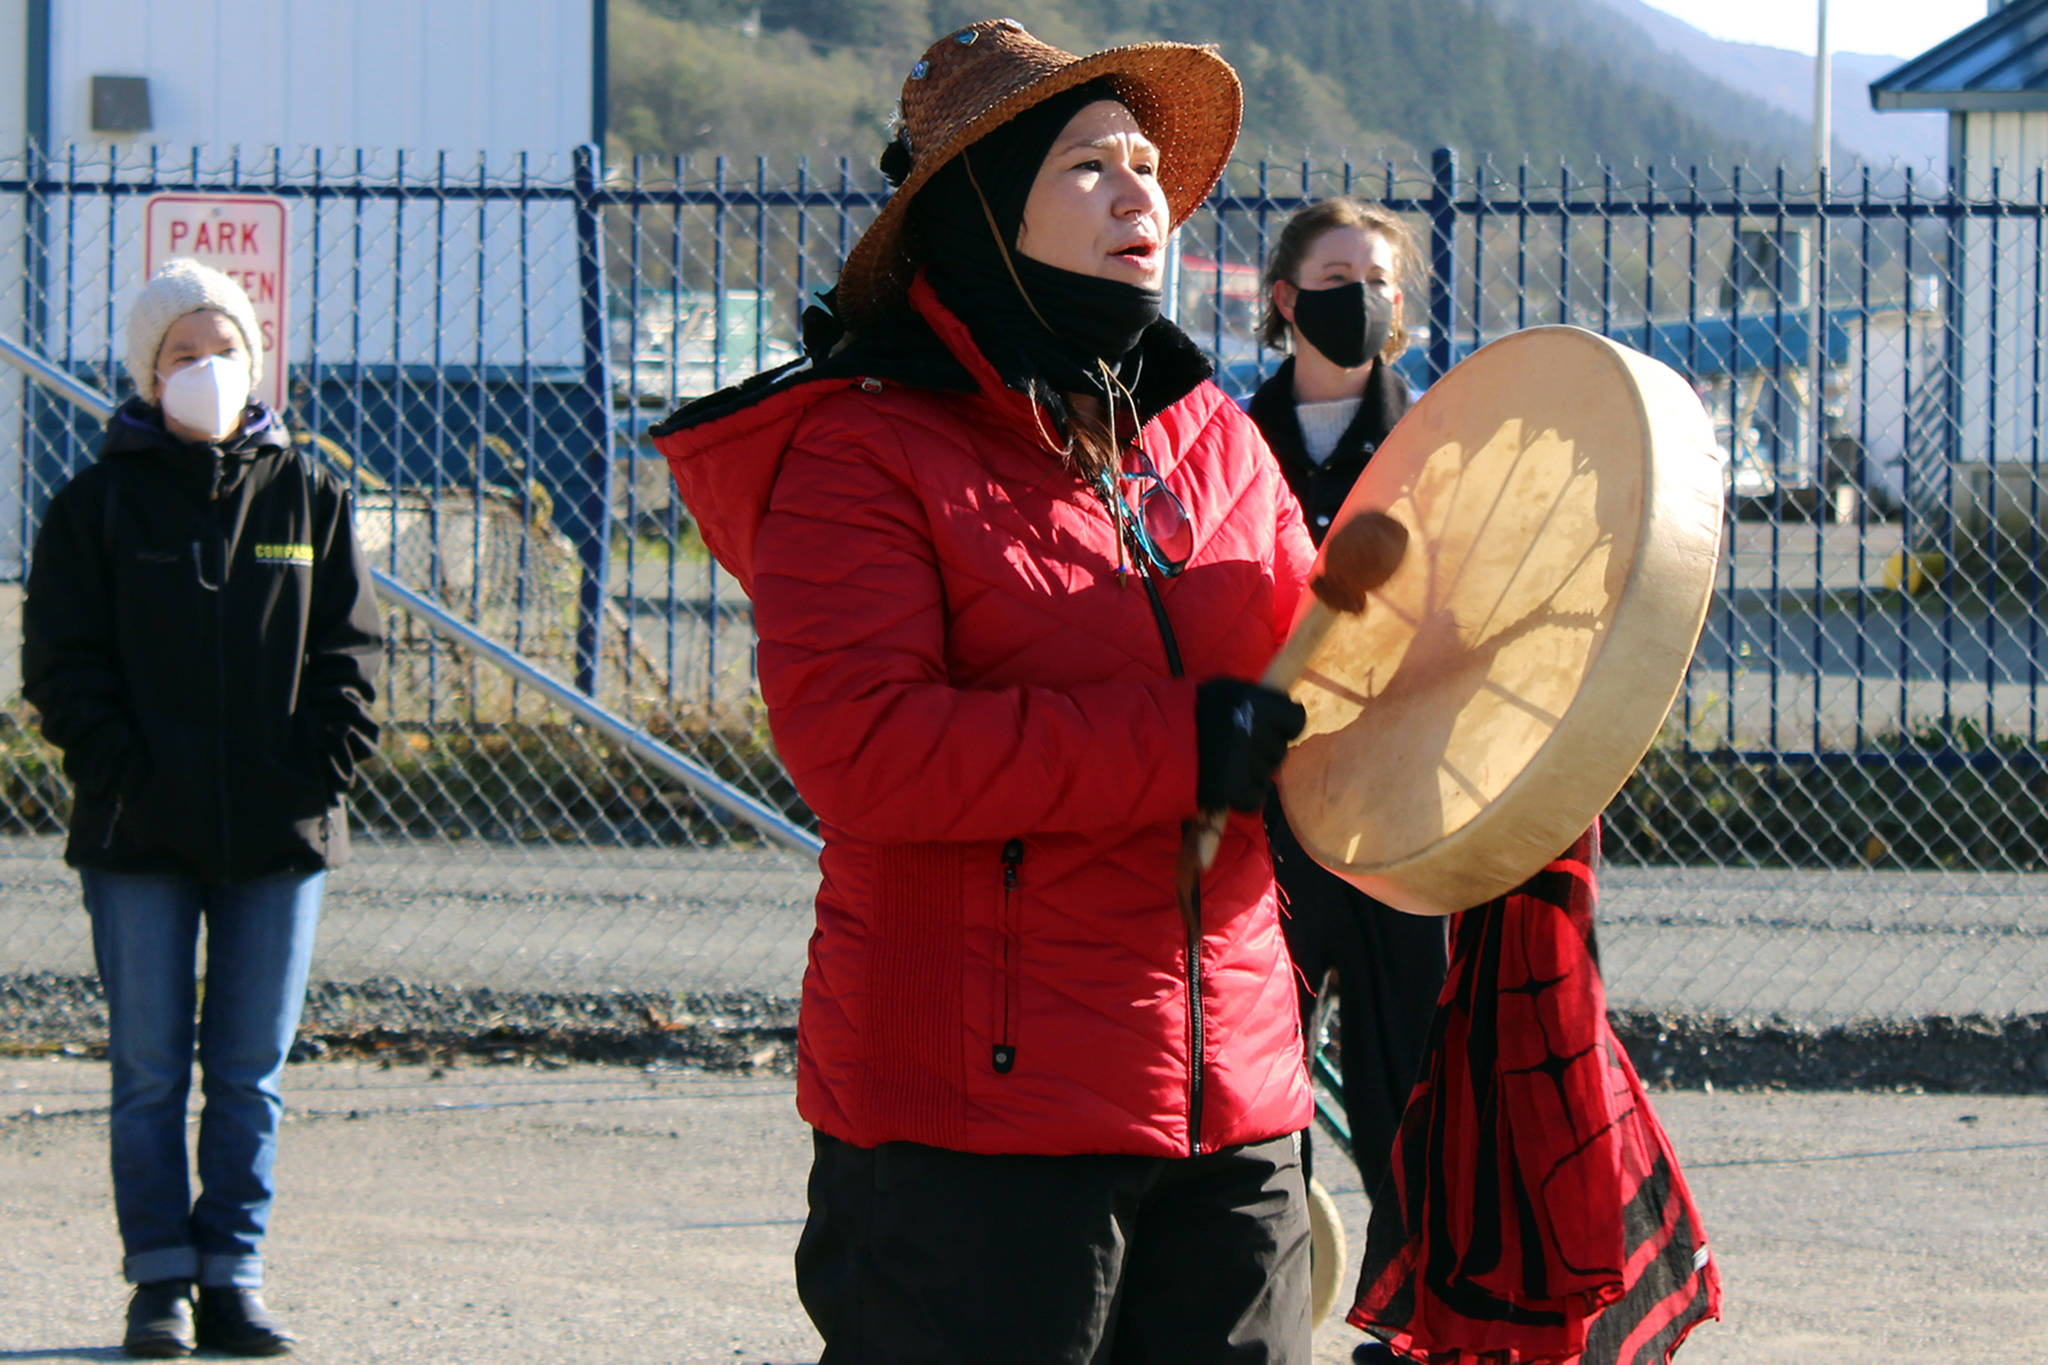 The march from the State Capitol to Mayor Bill Overstreet Park pauses for drumming and song on Saturday, Oct. 17. (Ben Hohenstatt / Juneau Empire)